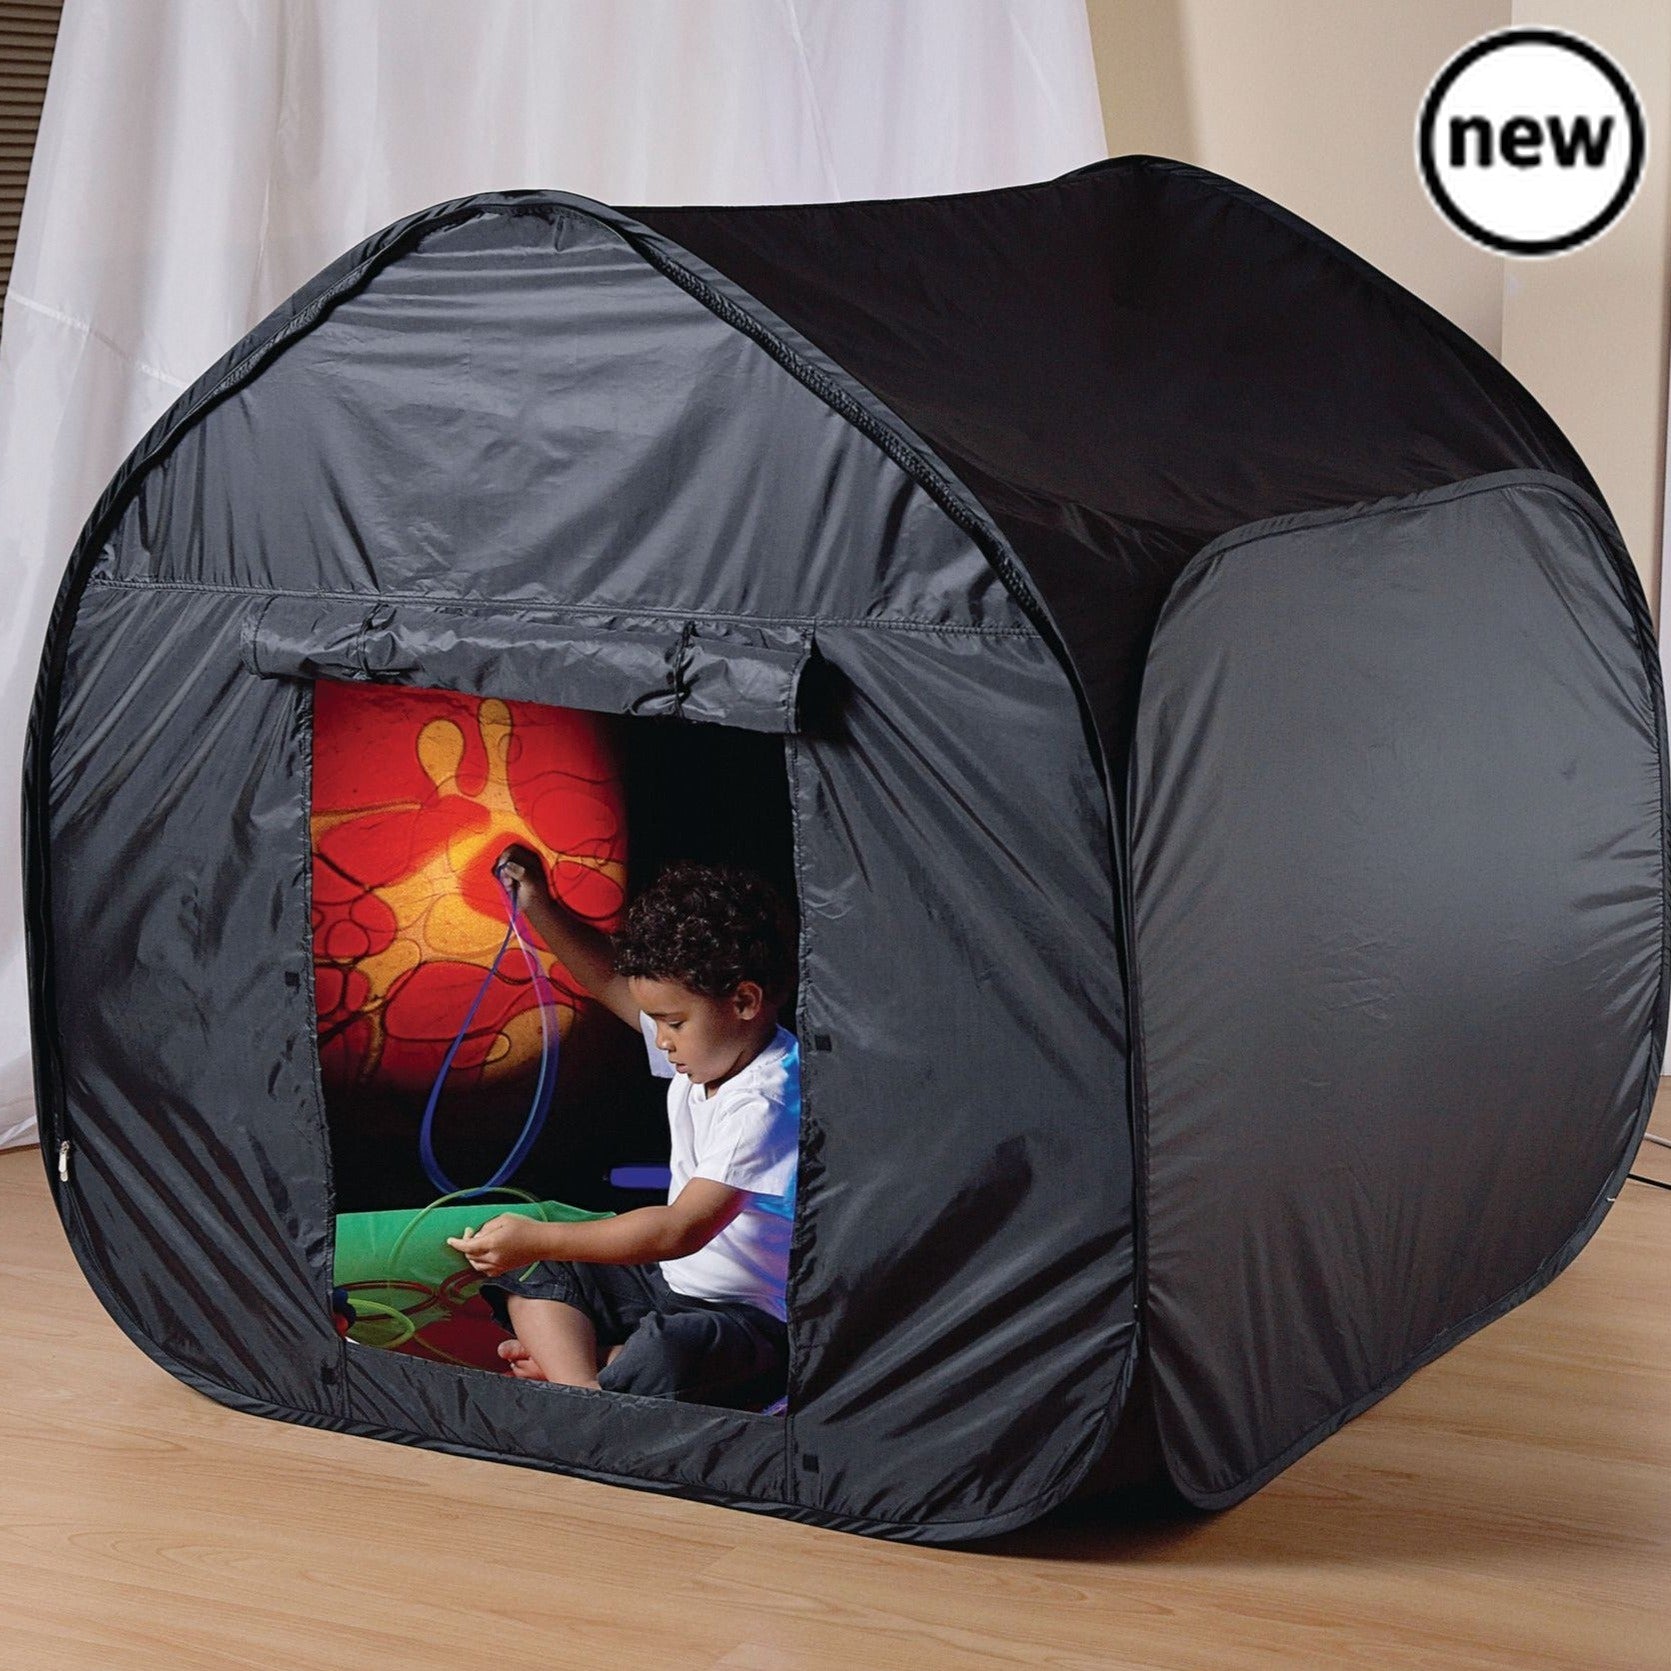 Black Dark Den, This fantastic pop-up sensory dark den pod is ideal for environments where a full sensory room is not available. Suitable for multiple users, the Dark Den Pod creates a temporary sensory room, with flaps which can tie up to create an open doorway into the area. Ideal for use with projectors and light sources, the double layered black environment creates a safe and enclosed area for sensory exploration. The Dark Den Pod is modular and can be easily joined with other Pods - perfect for creatin